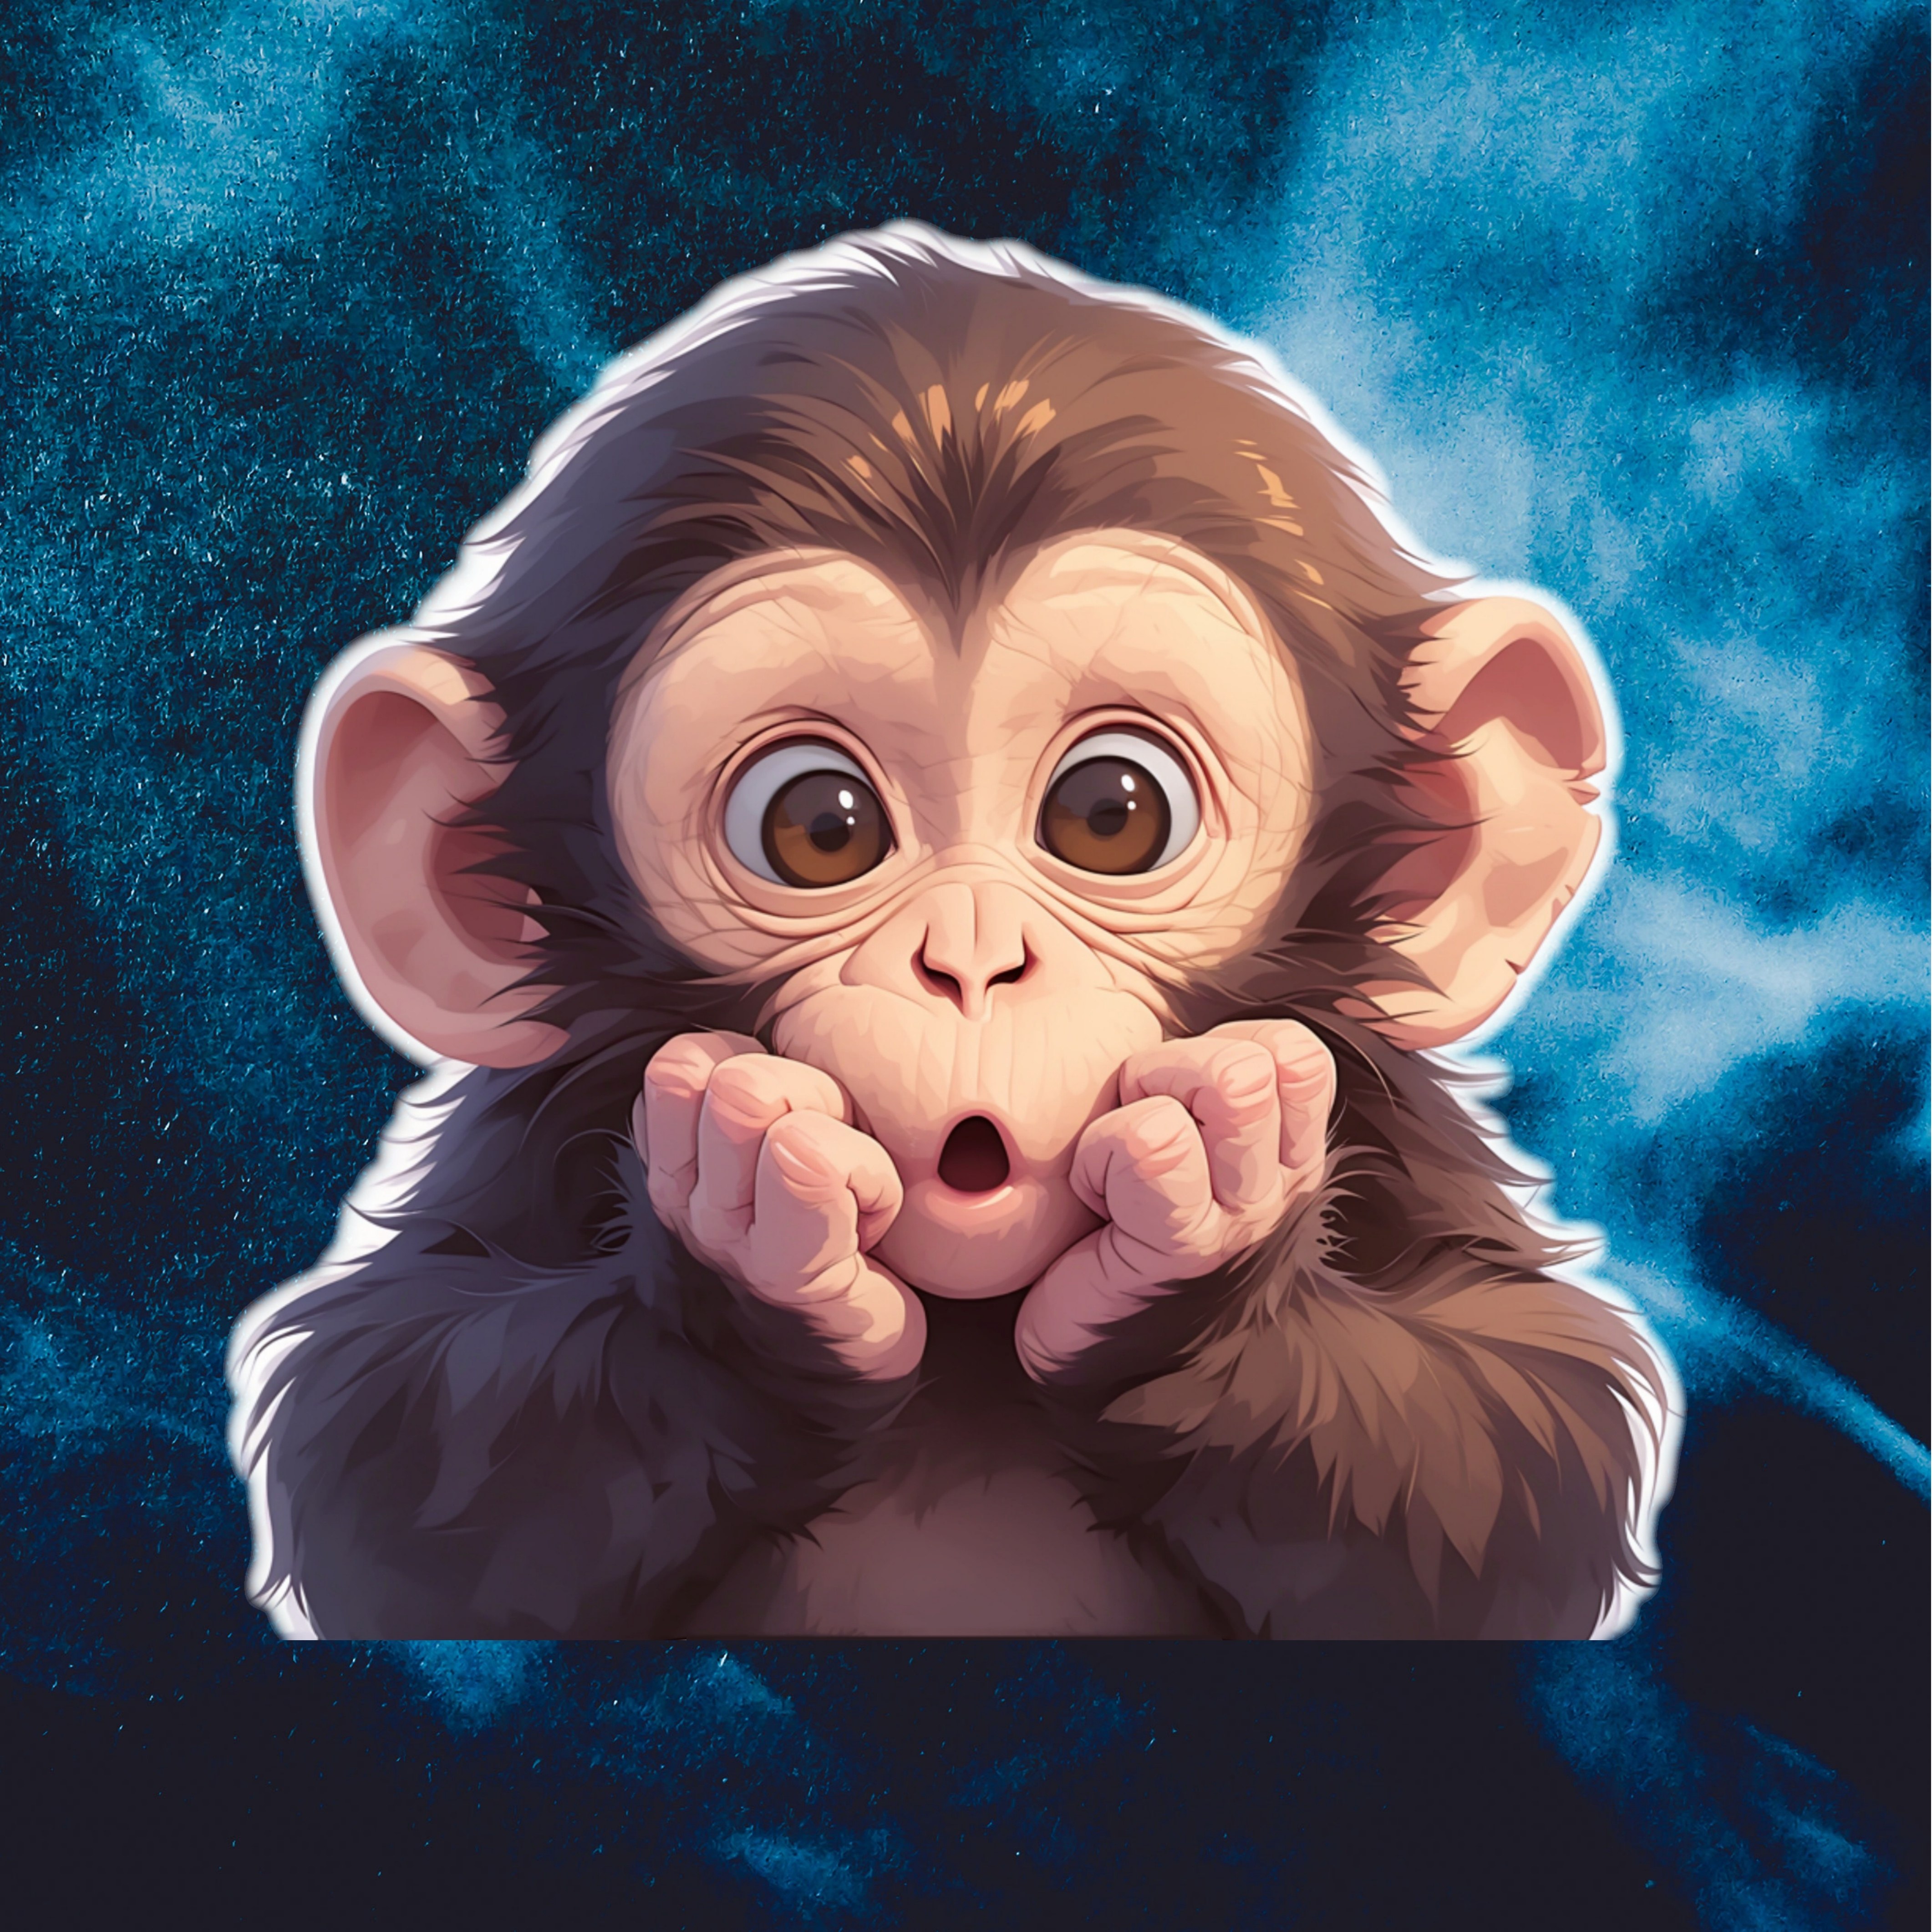 

Adorable Monkey Cheek Decal - Durable Pvc Sticker For Cars, Trucks, Motorcycles, Walls & Windows Monkey Car Accessories Monkey Stickers